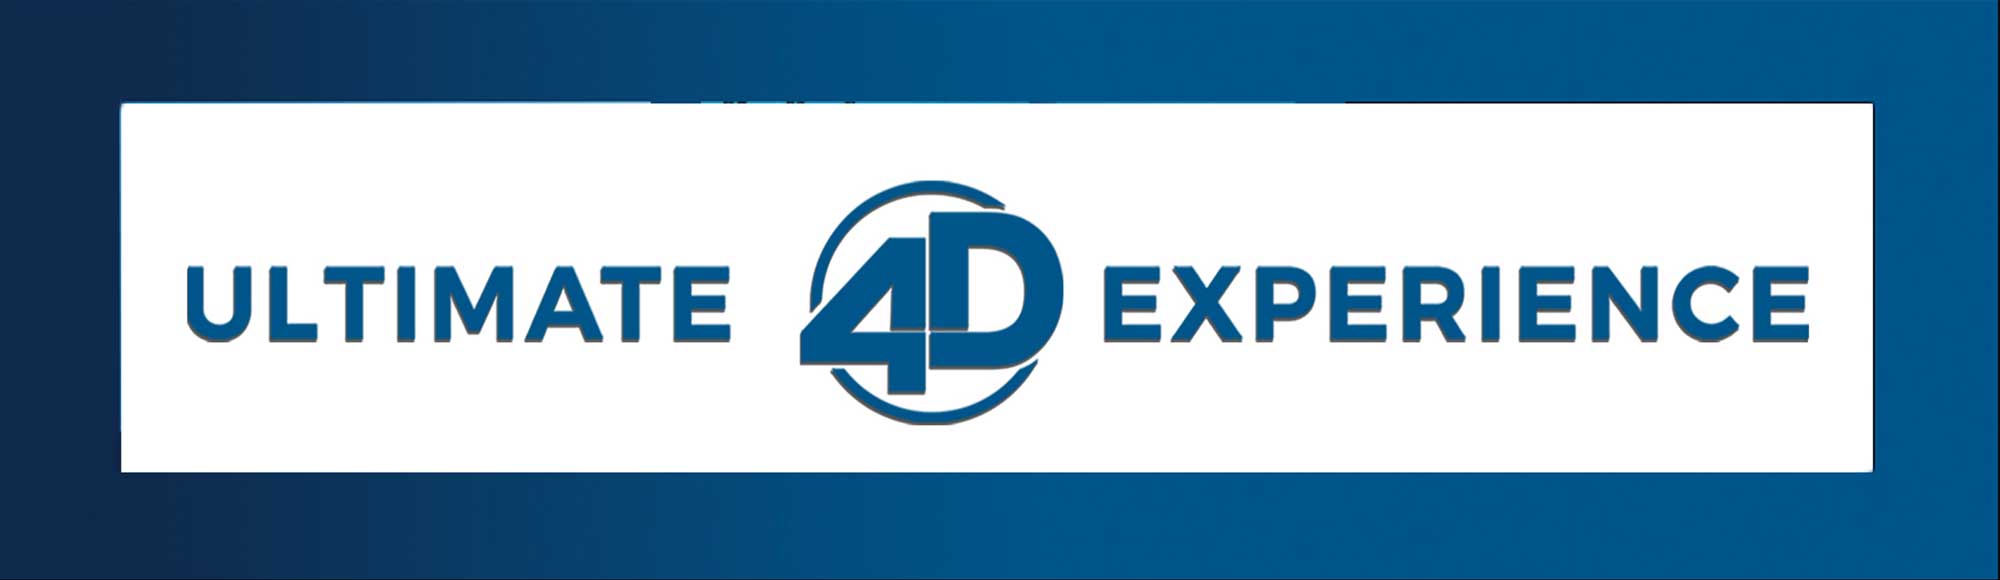 Ultimate 4D Experience attraction